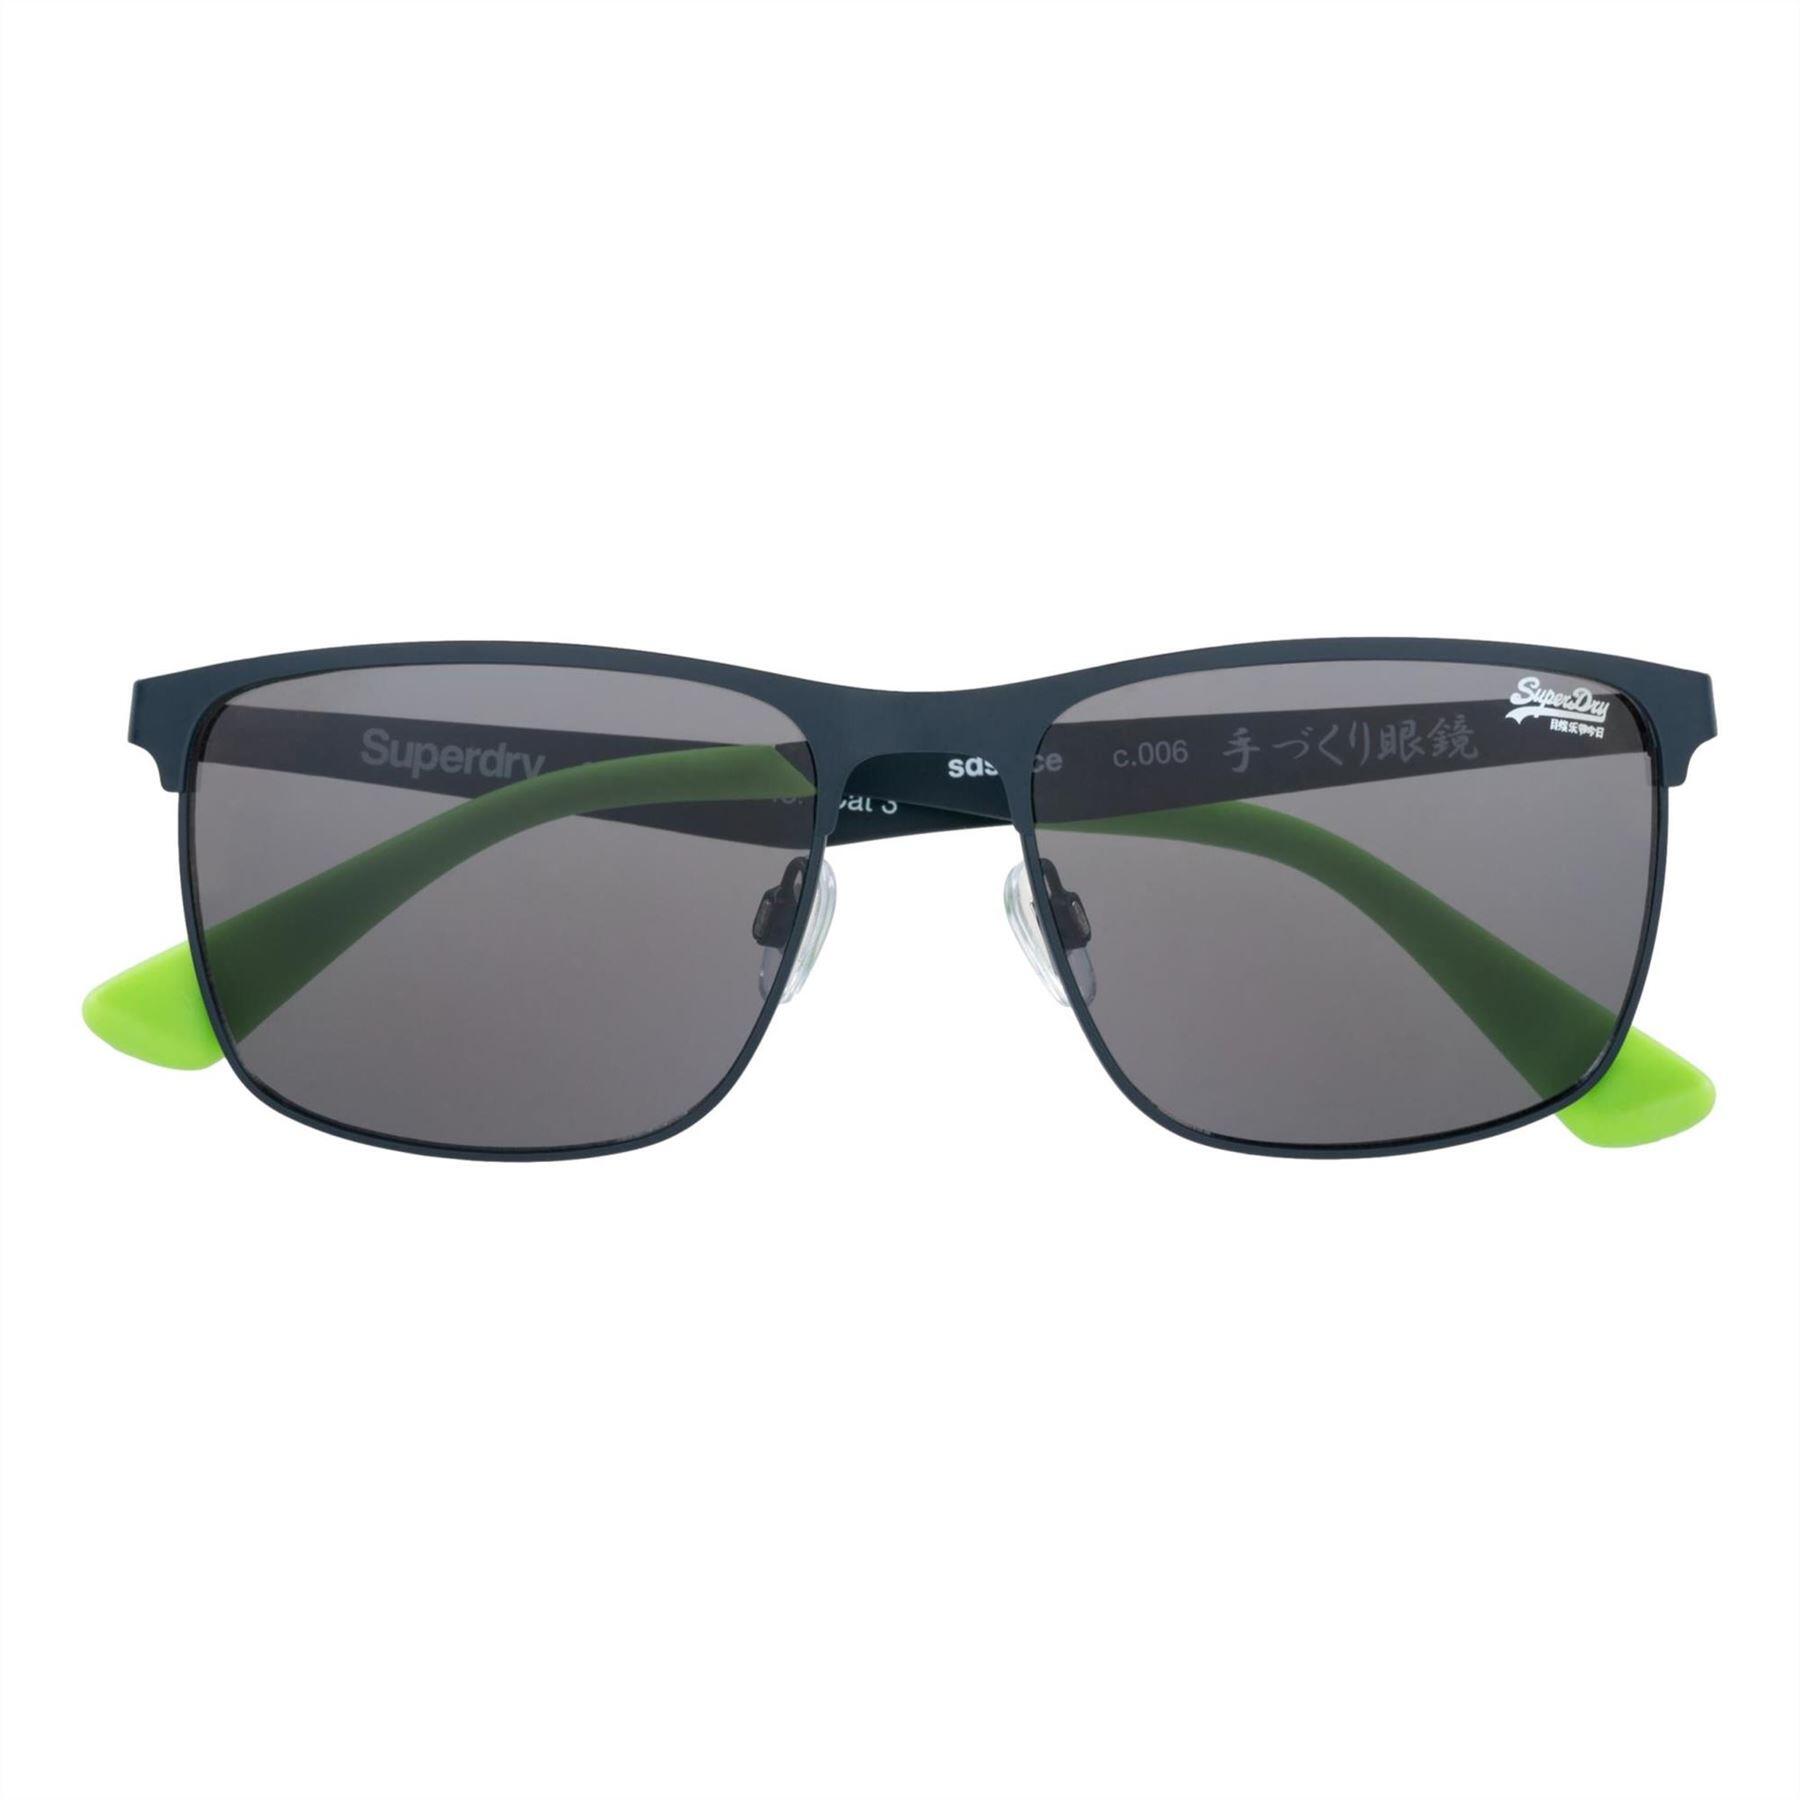 SUPERDRY Superdry Ace Sunglasses - Navy / Lime